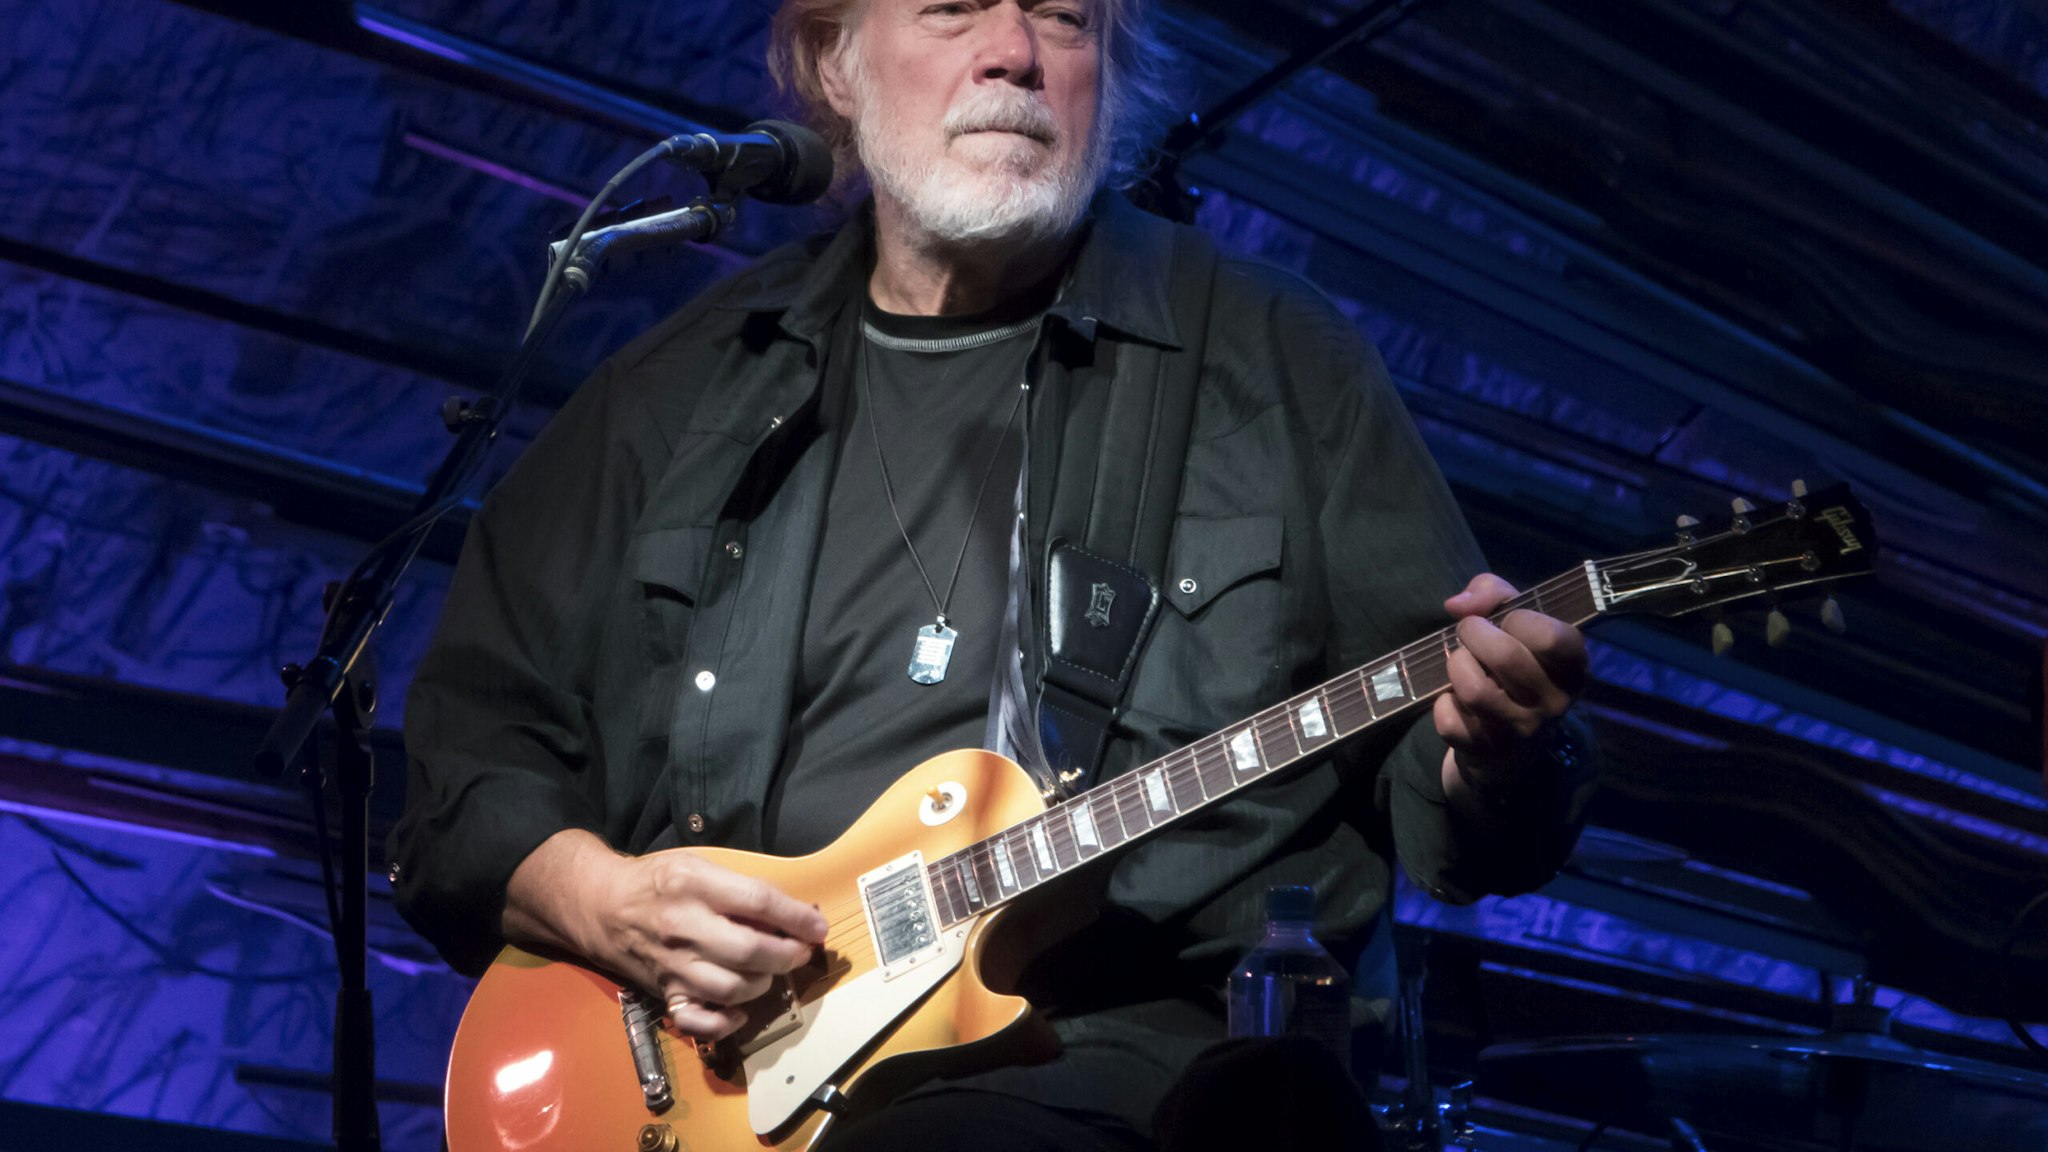 Randy Bachman will soon be reunited with his long-lost guitar, stolen some 45 years ago from a Toronto hotel room.